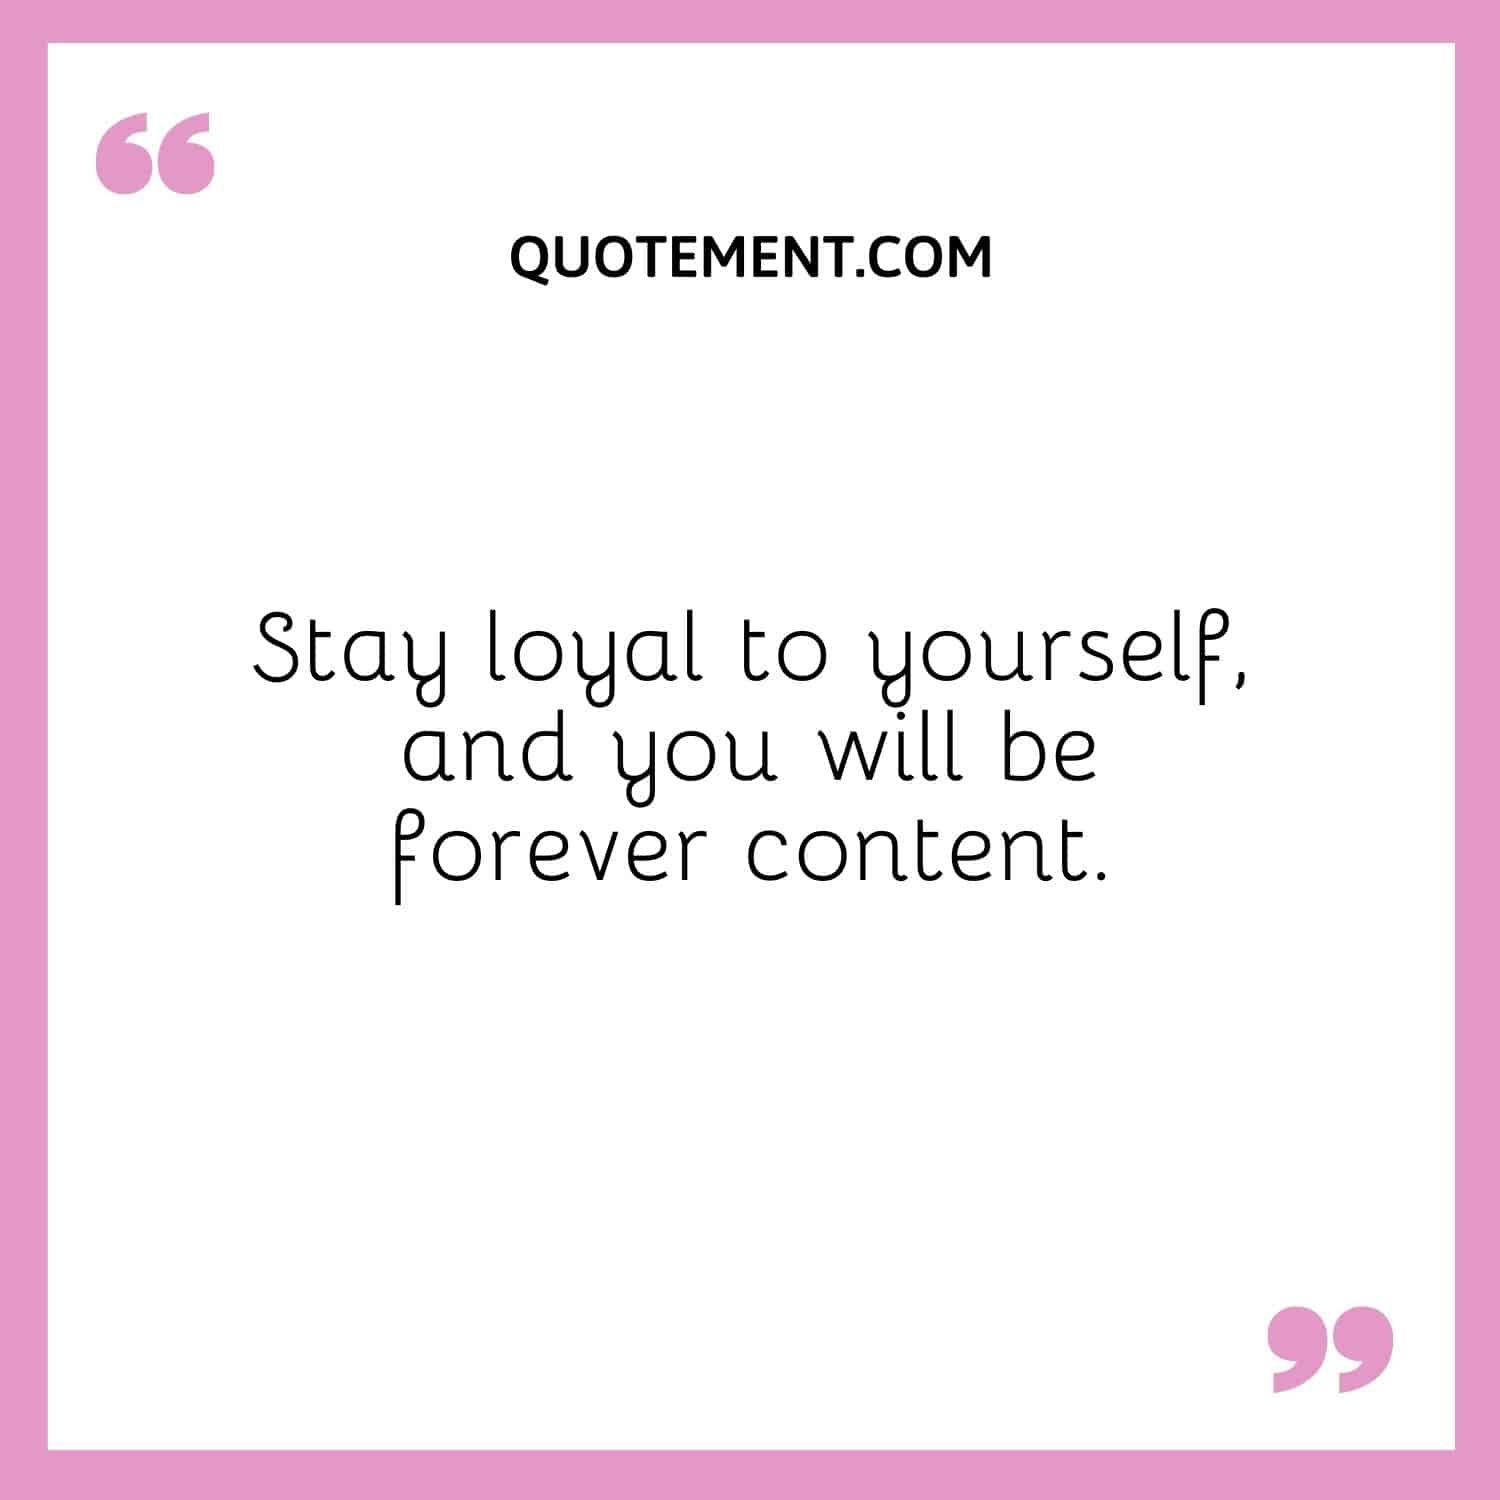 Stay loyal to yourself